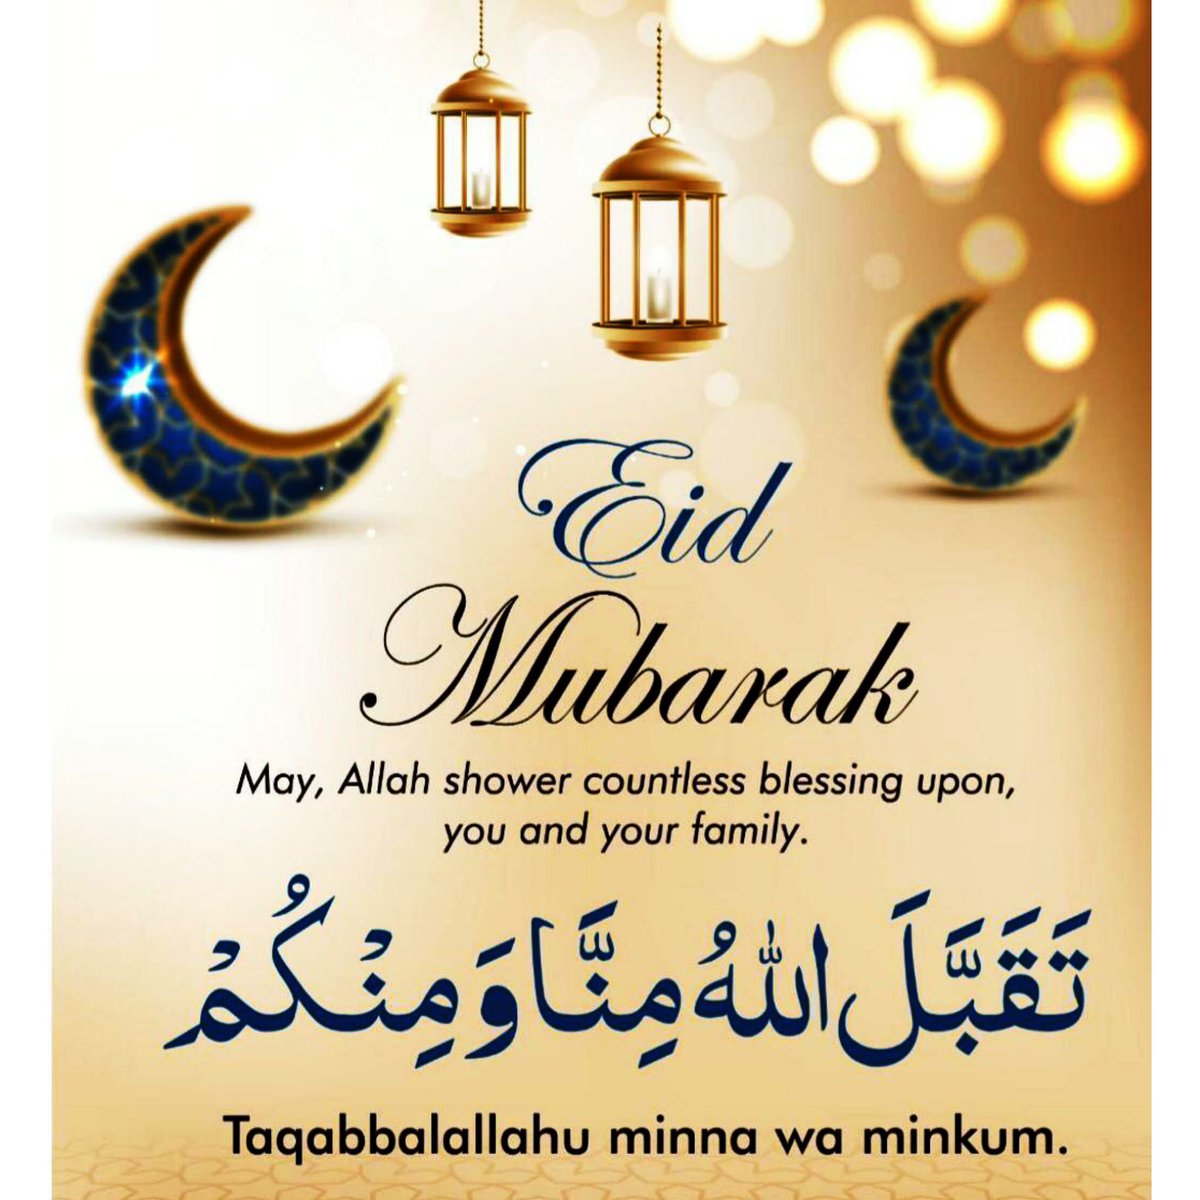 #EidMubarak after a couple of lockdown Eids and a difficult personal year , I can’t wait to see my family and enjoy today in a safe way .. heartfelt best wishes to everyone of every faith and none @mcrlco @TraffordLCO @MFTnhs @ManCityCouncil @ManchesterHCC  @PrimaryCareNHS